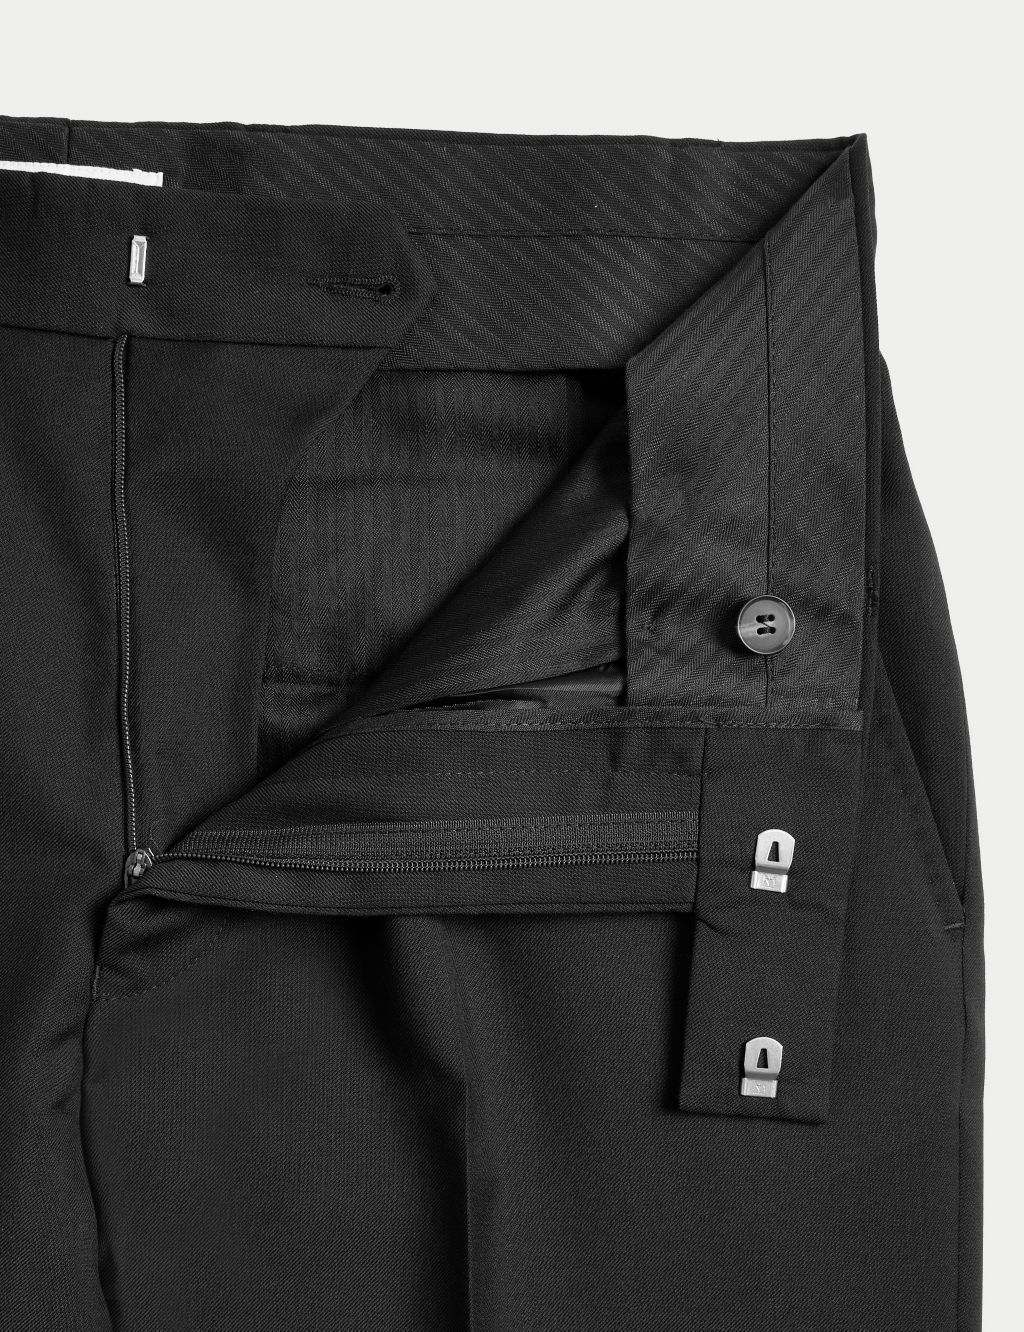 Tailored Fit Pure Wool Twill Trousers image 3